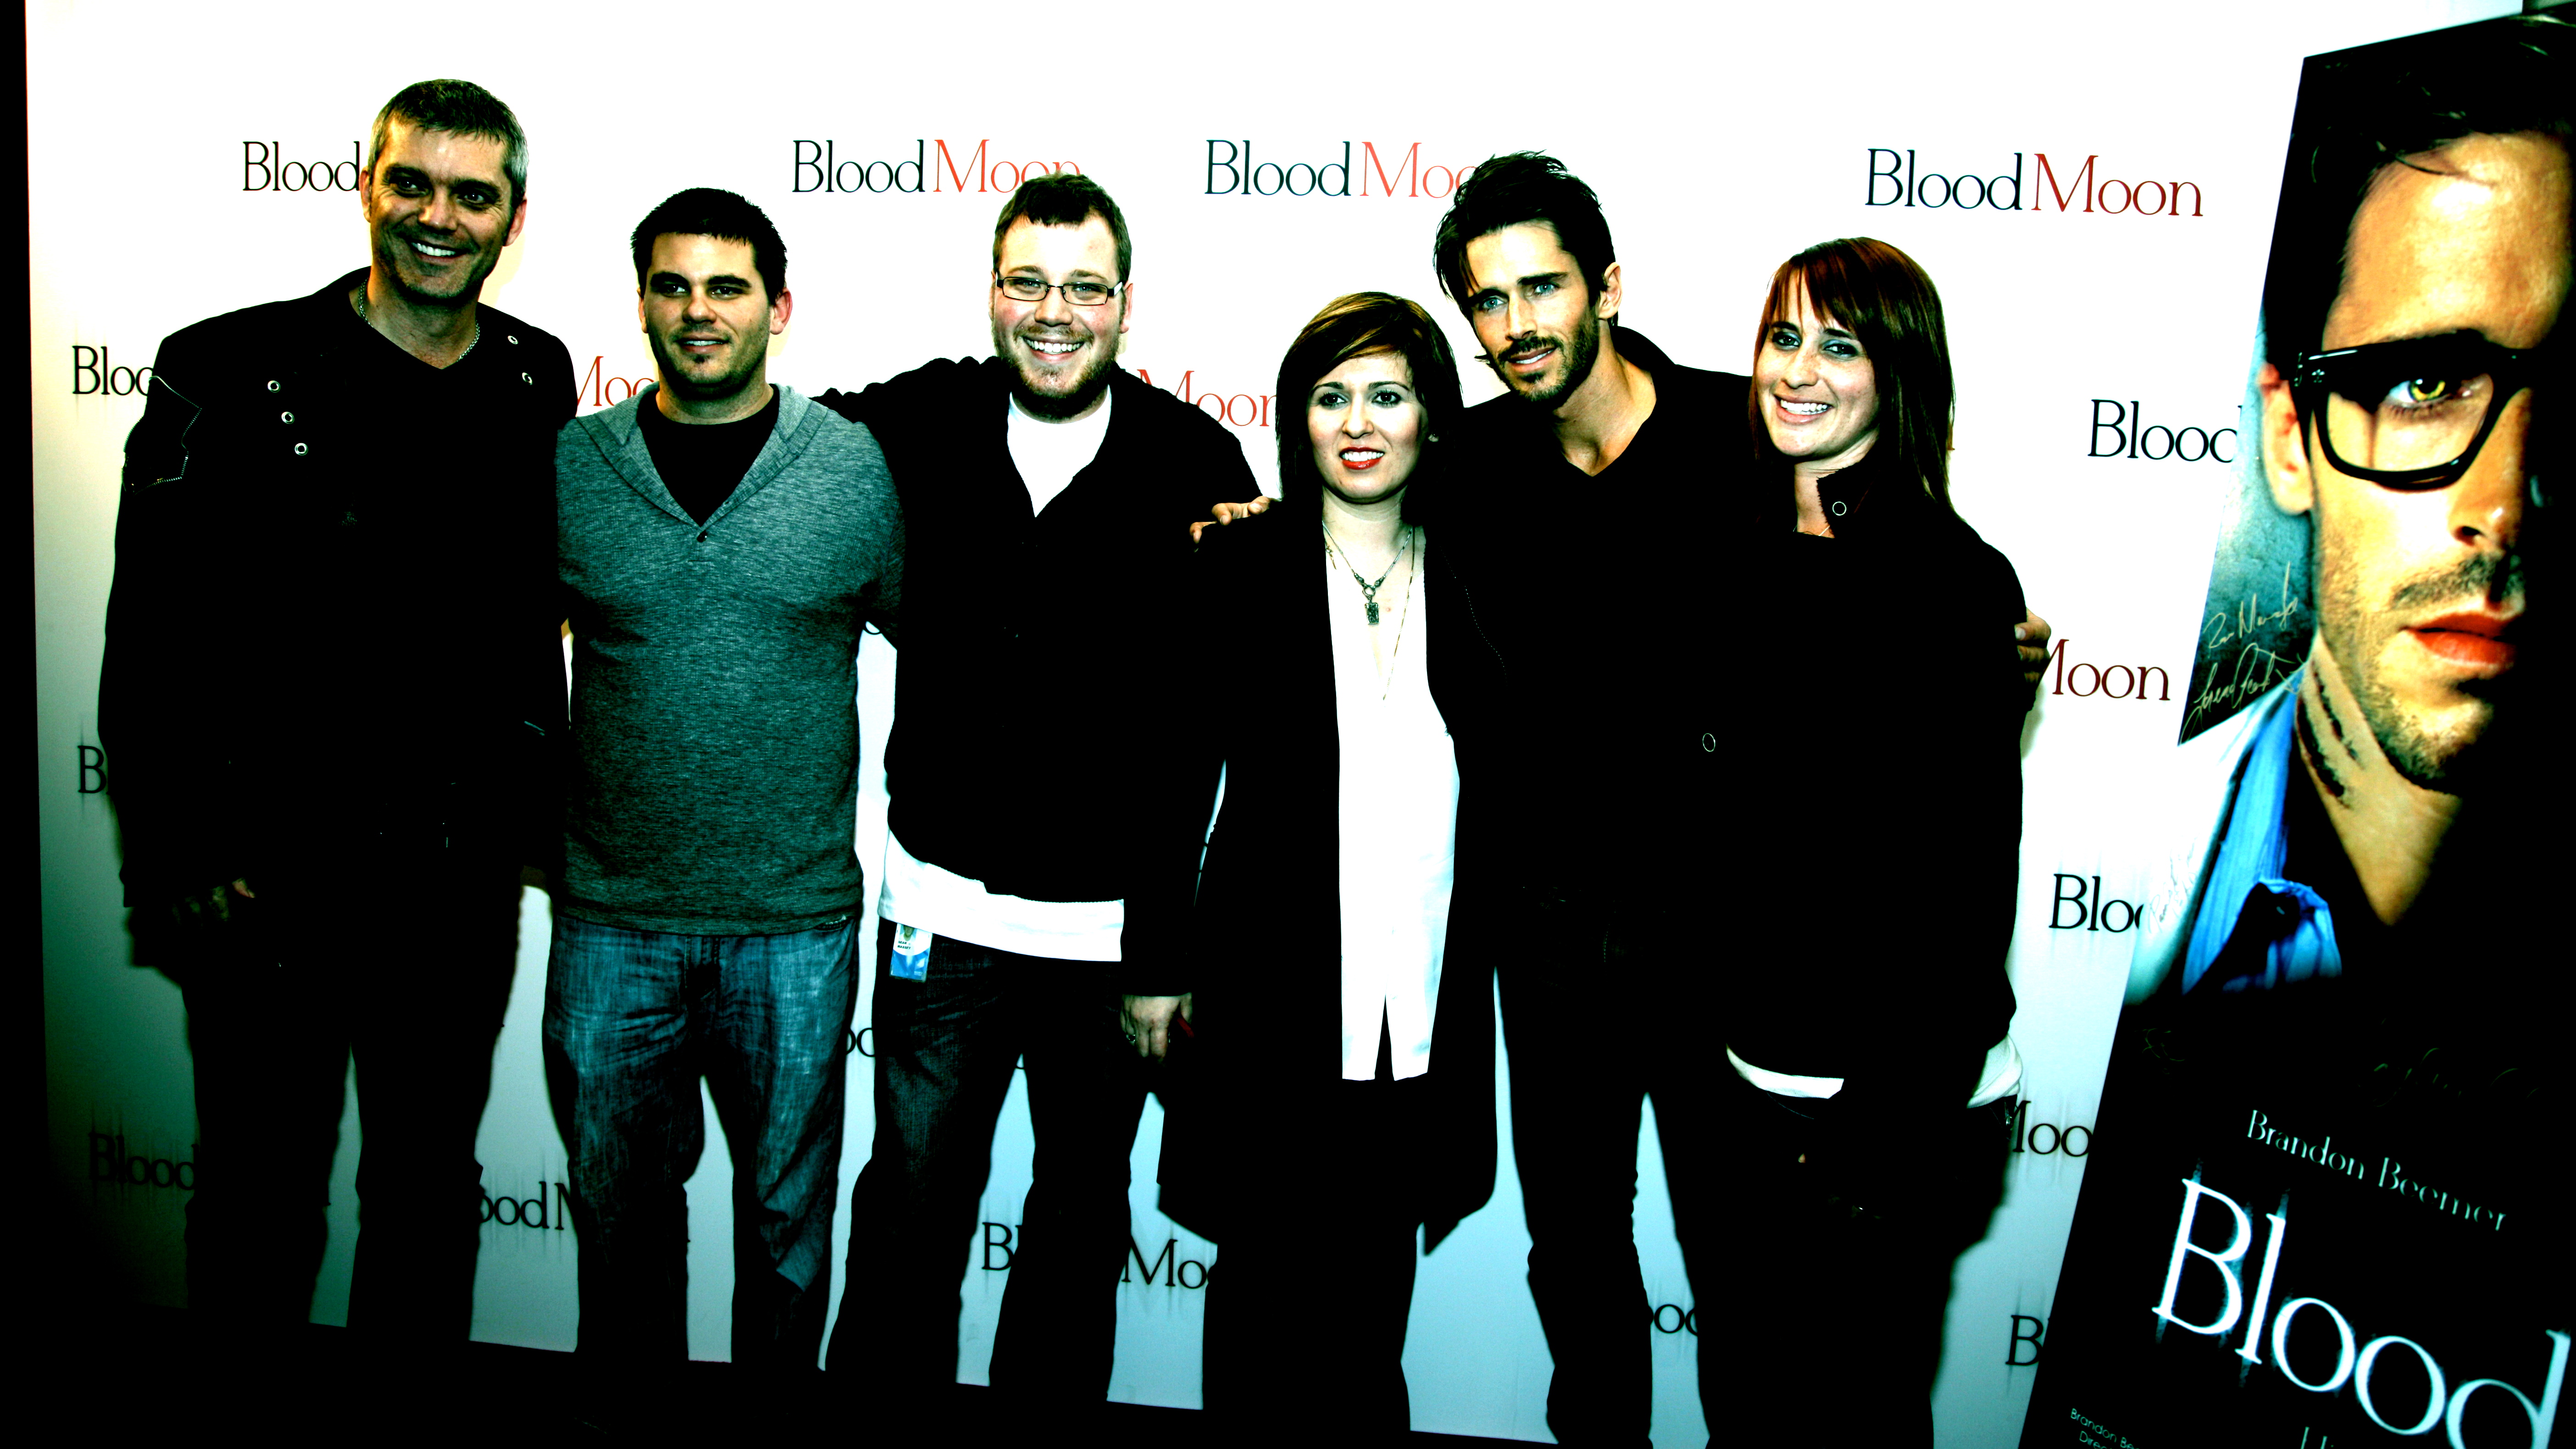 The crew of BLOOD MOON at the premiere, Sony Pictures Studios, 2012.